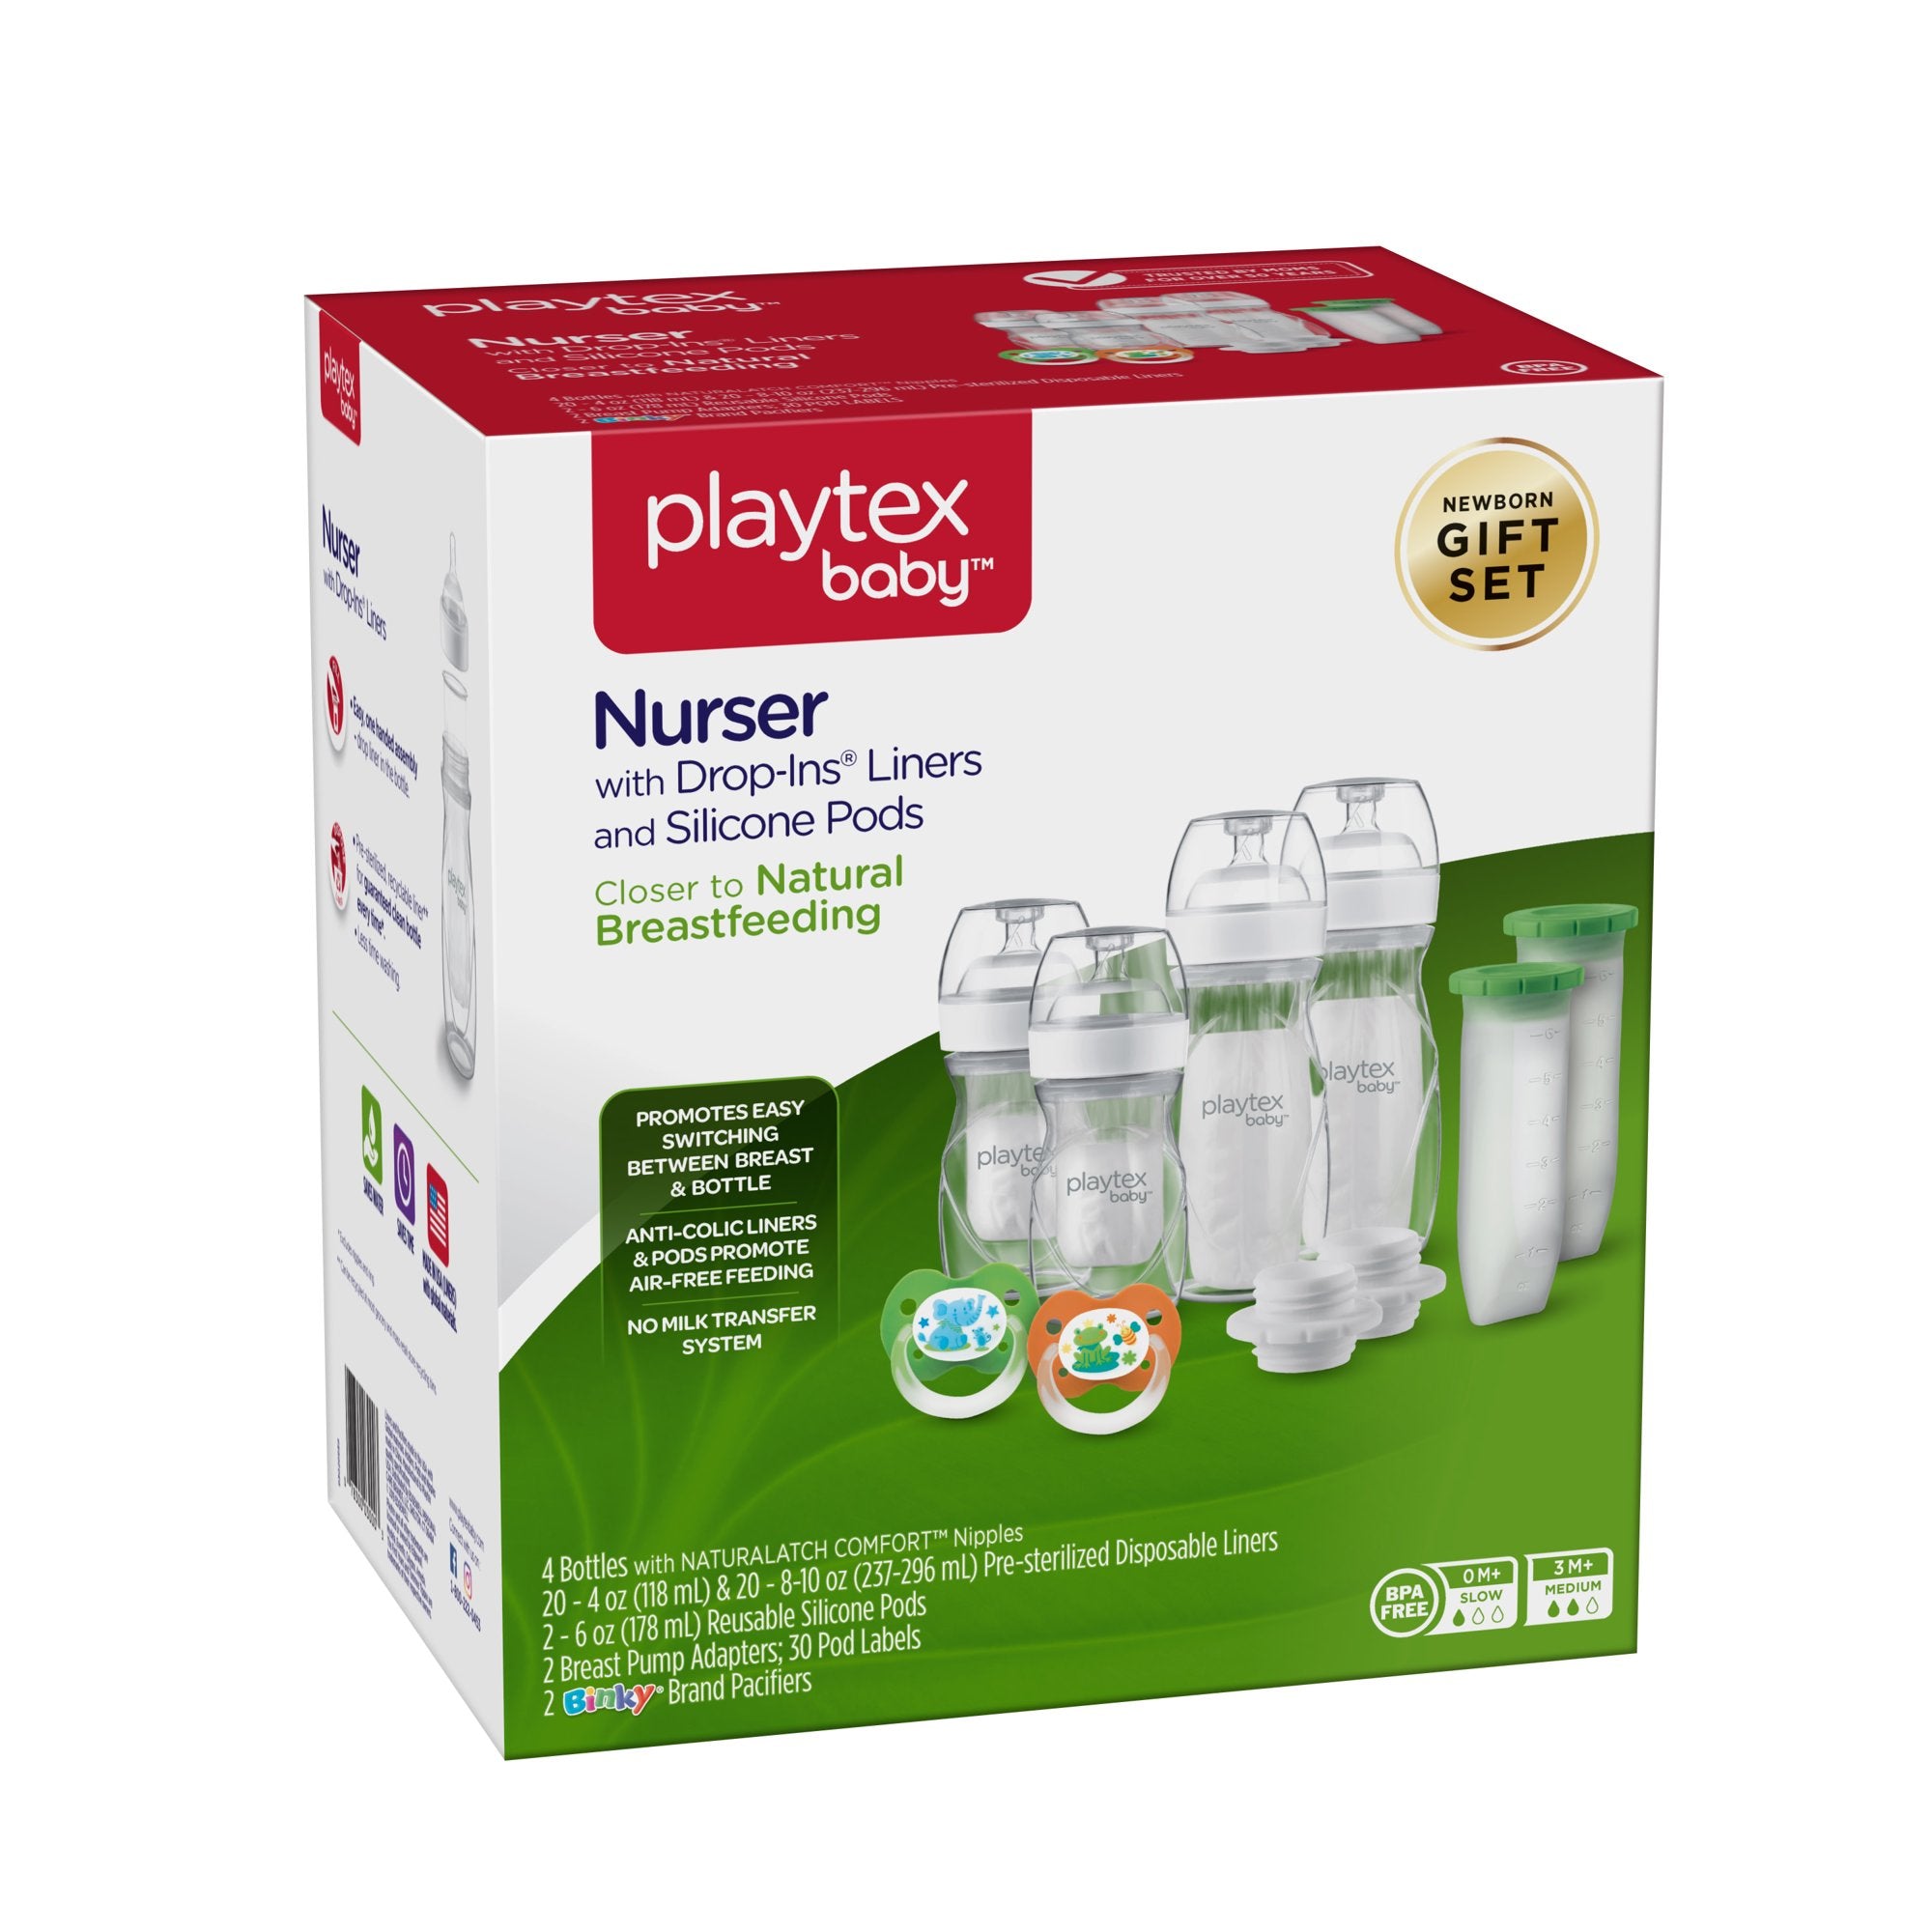 Playtex Baby Nurser DELUXE Gift Set with Drop In liners and